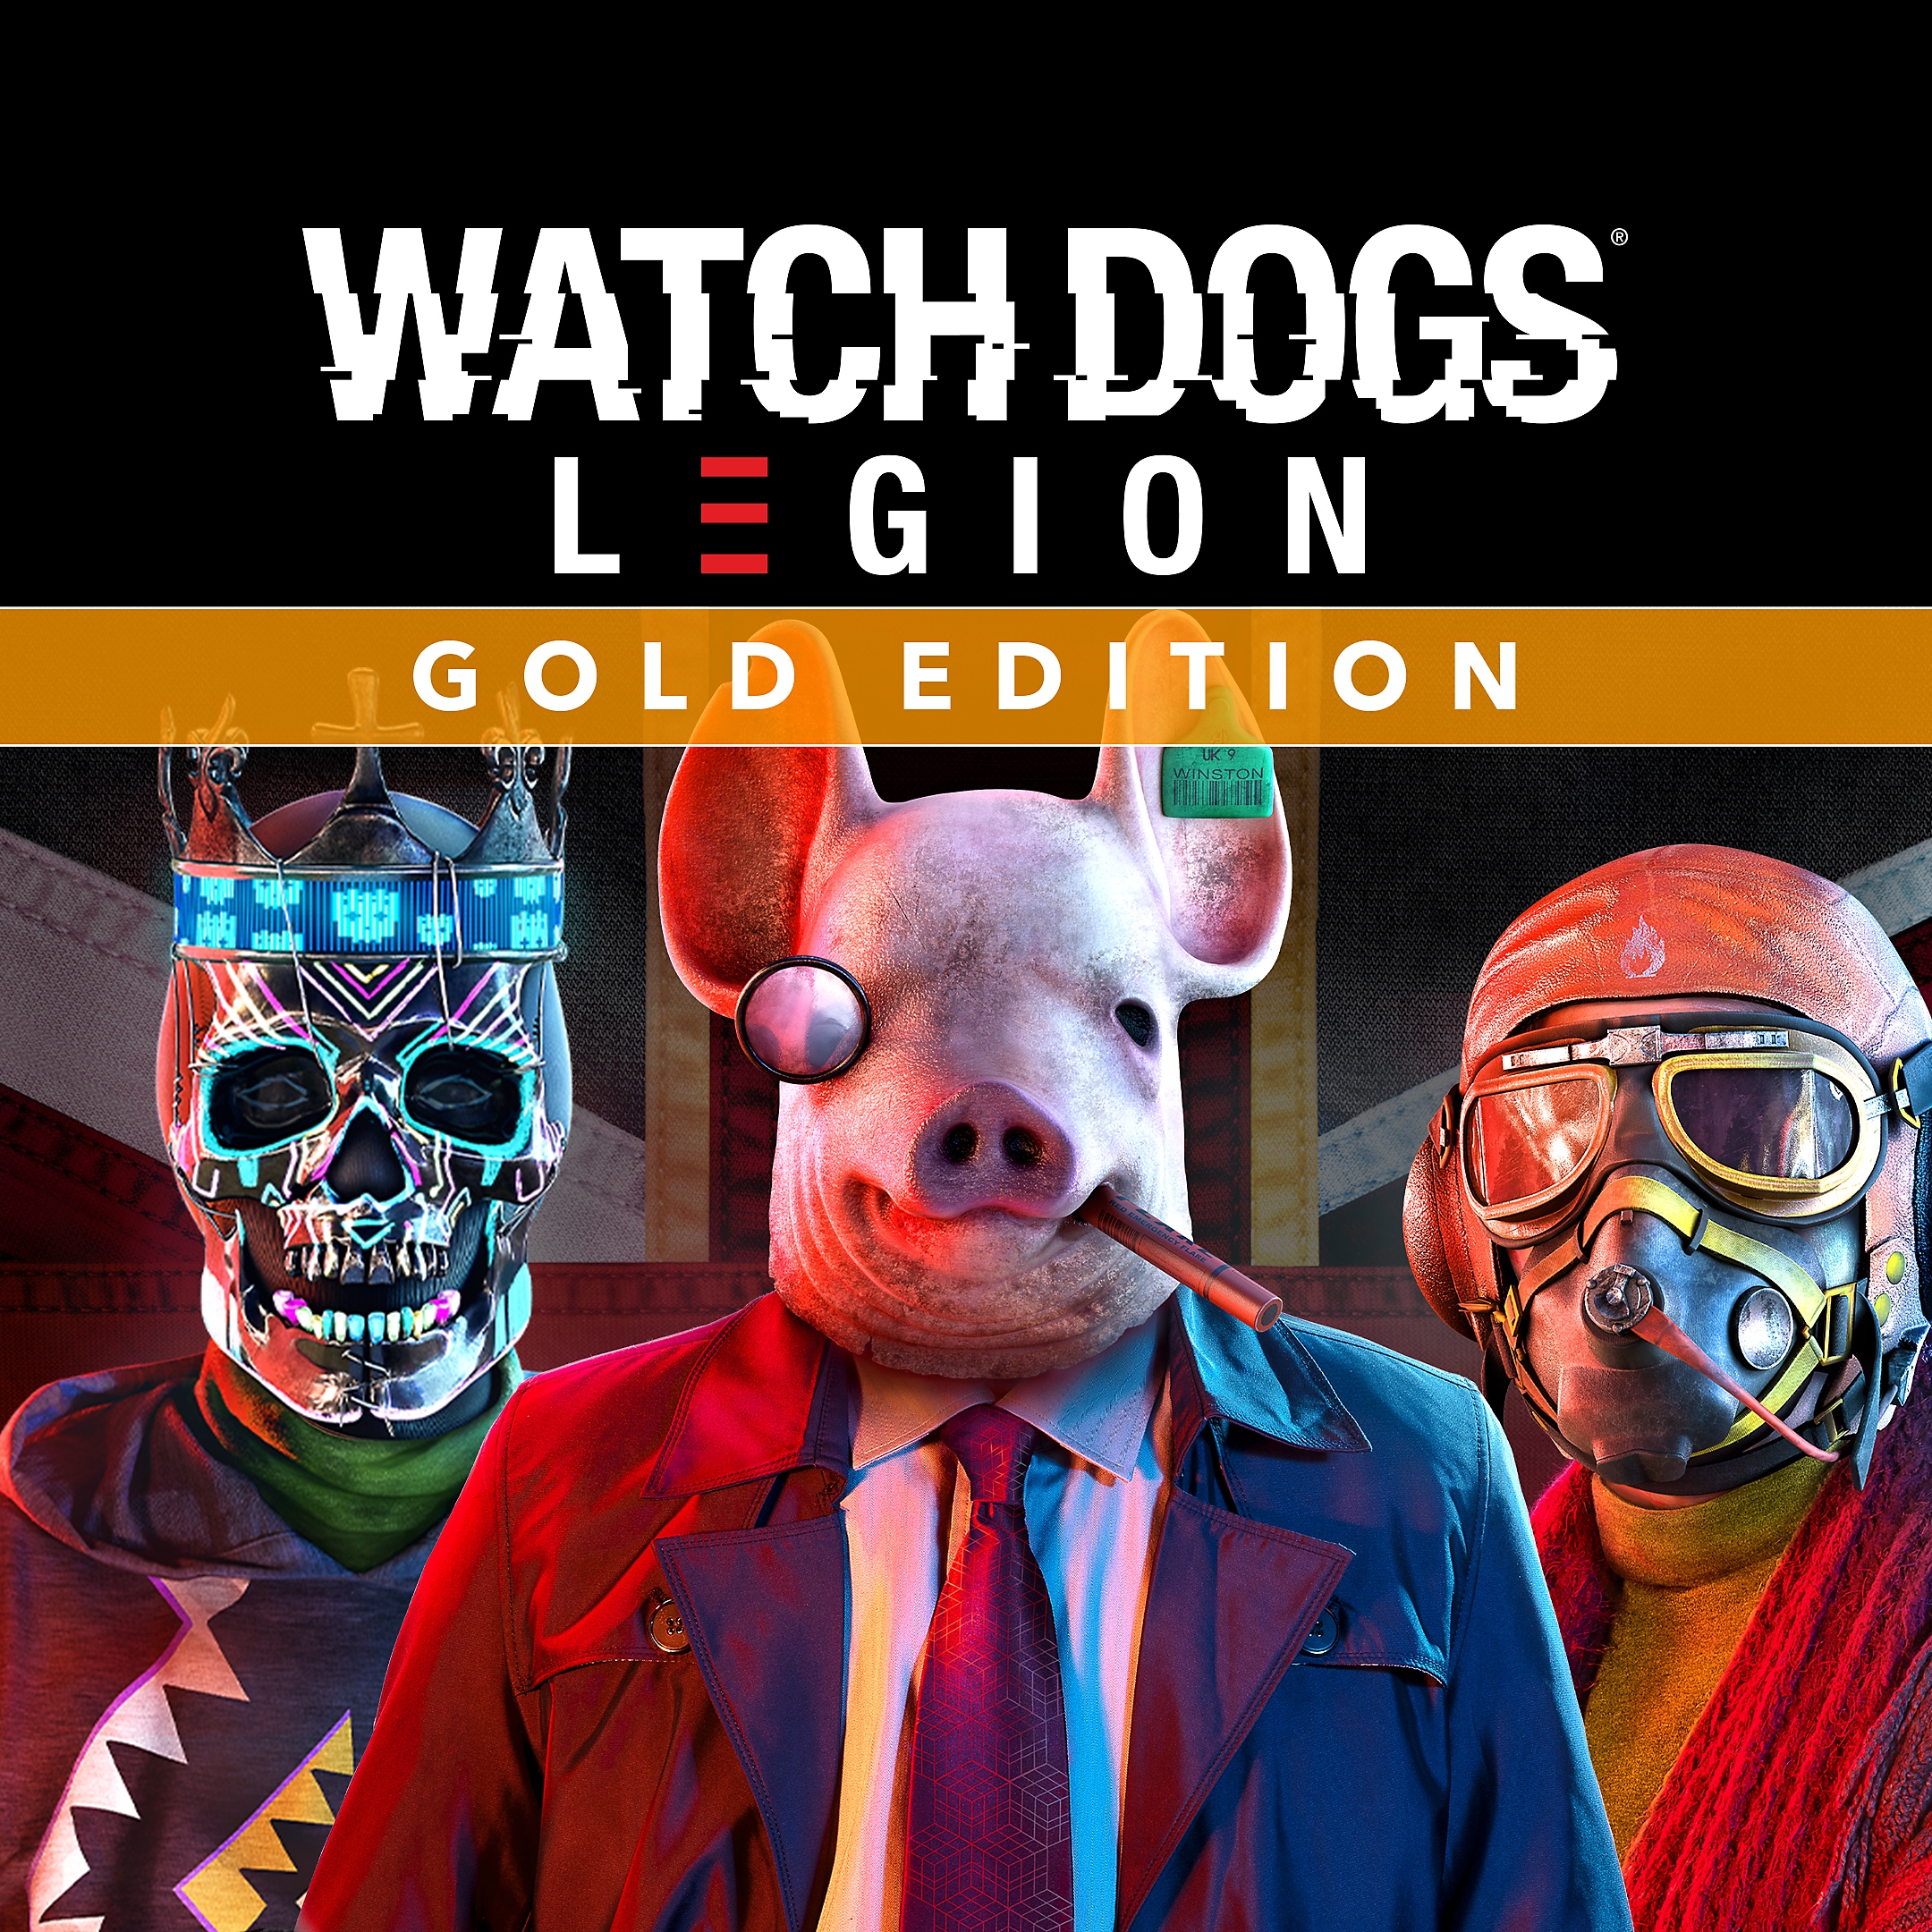 Watch Dogs: Legion - Gold Edition Store Art